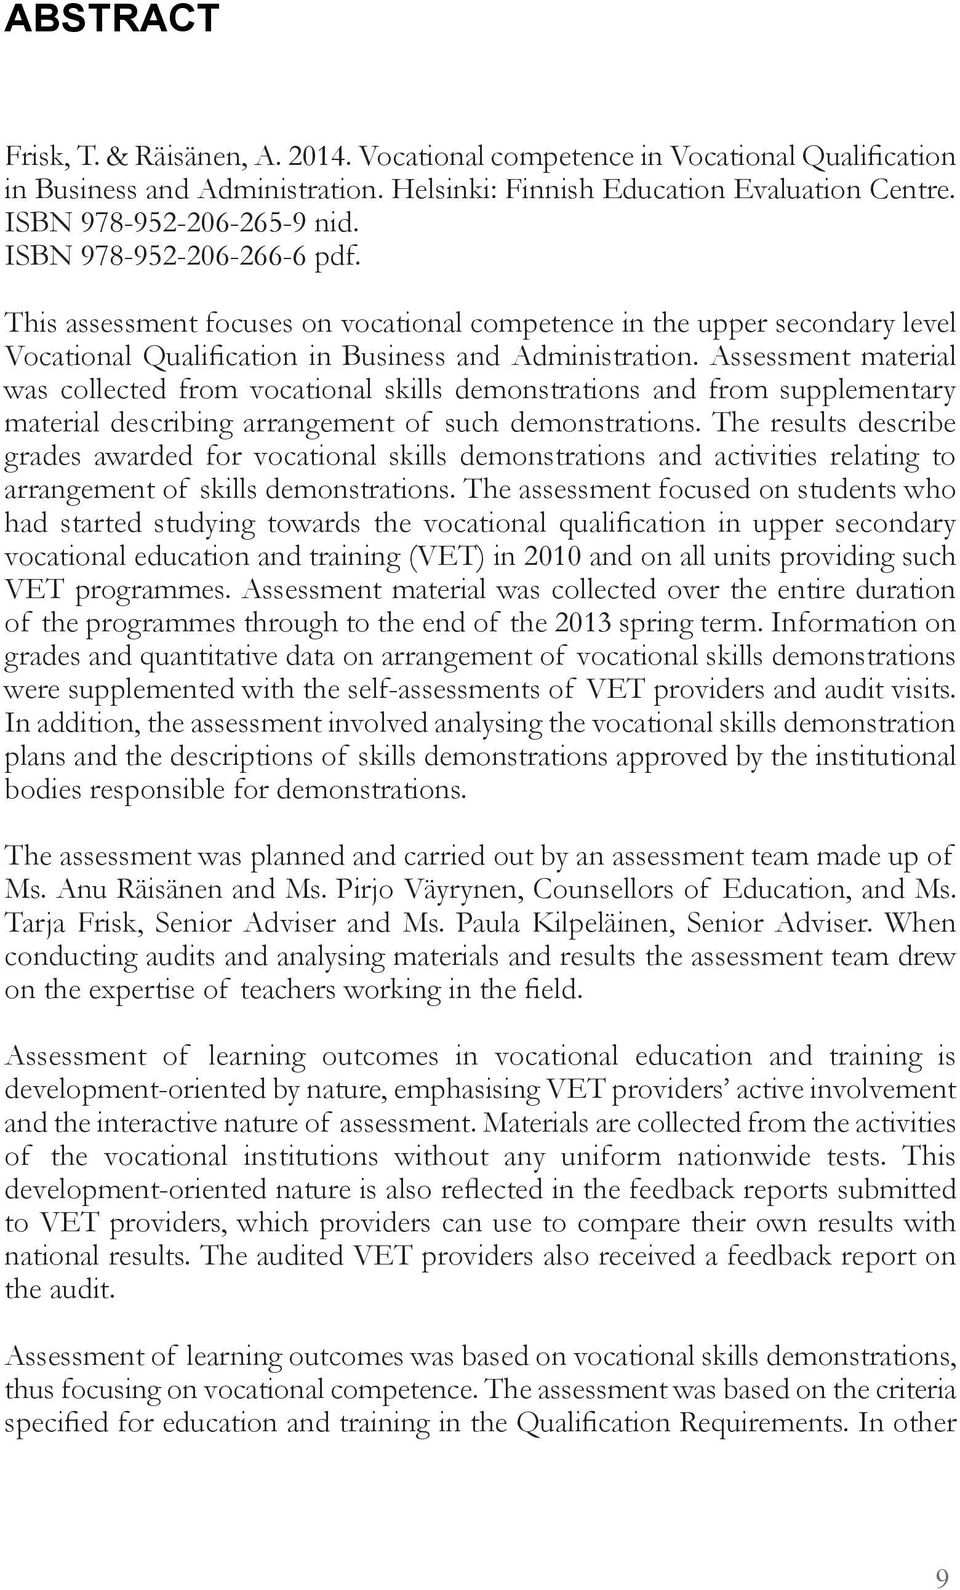 Assessment material was collected from vocational skills demonstrations and from supplementary material describing arrangement of such demonstrations.